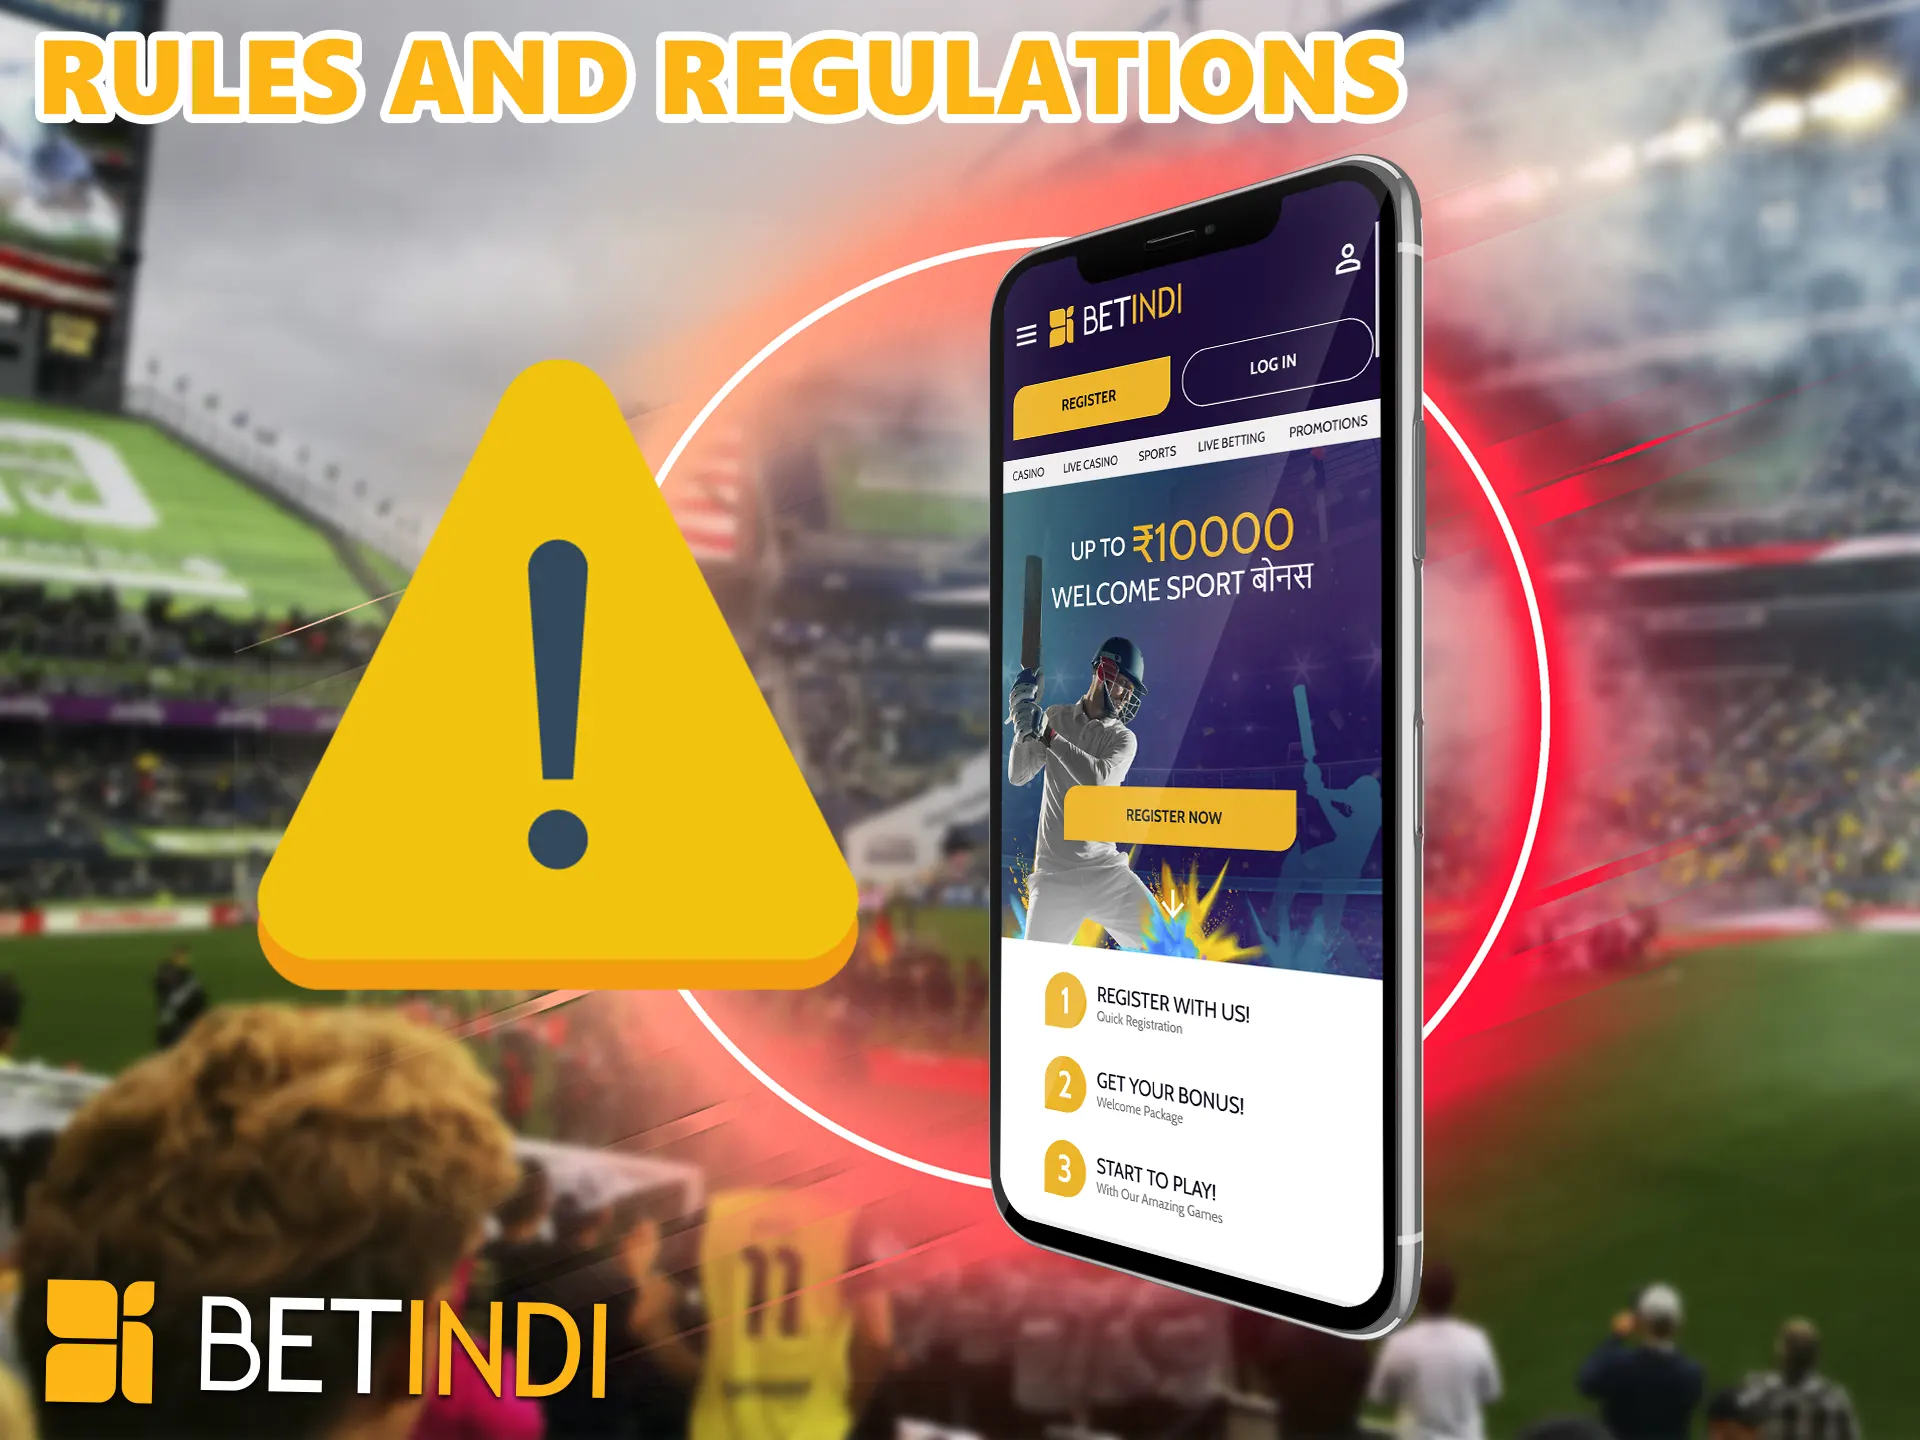 All gambling sites have rules, BetIndi bookmaker is no exception, read them carefully before you start playing.